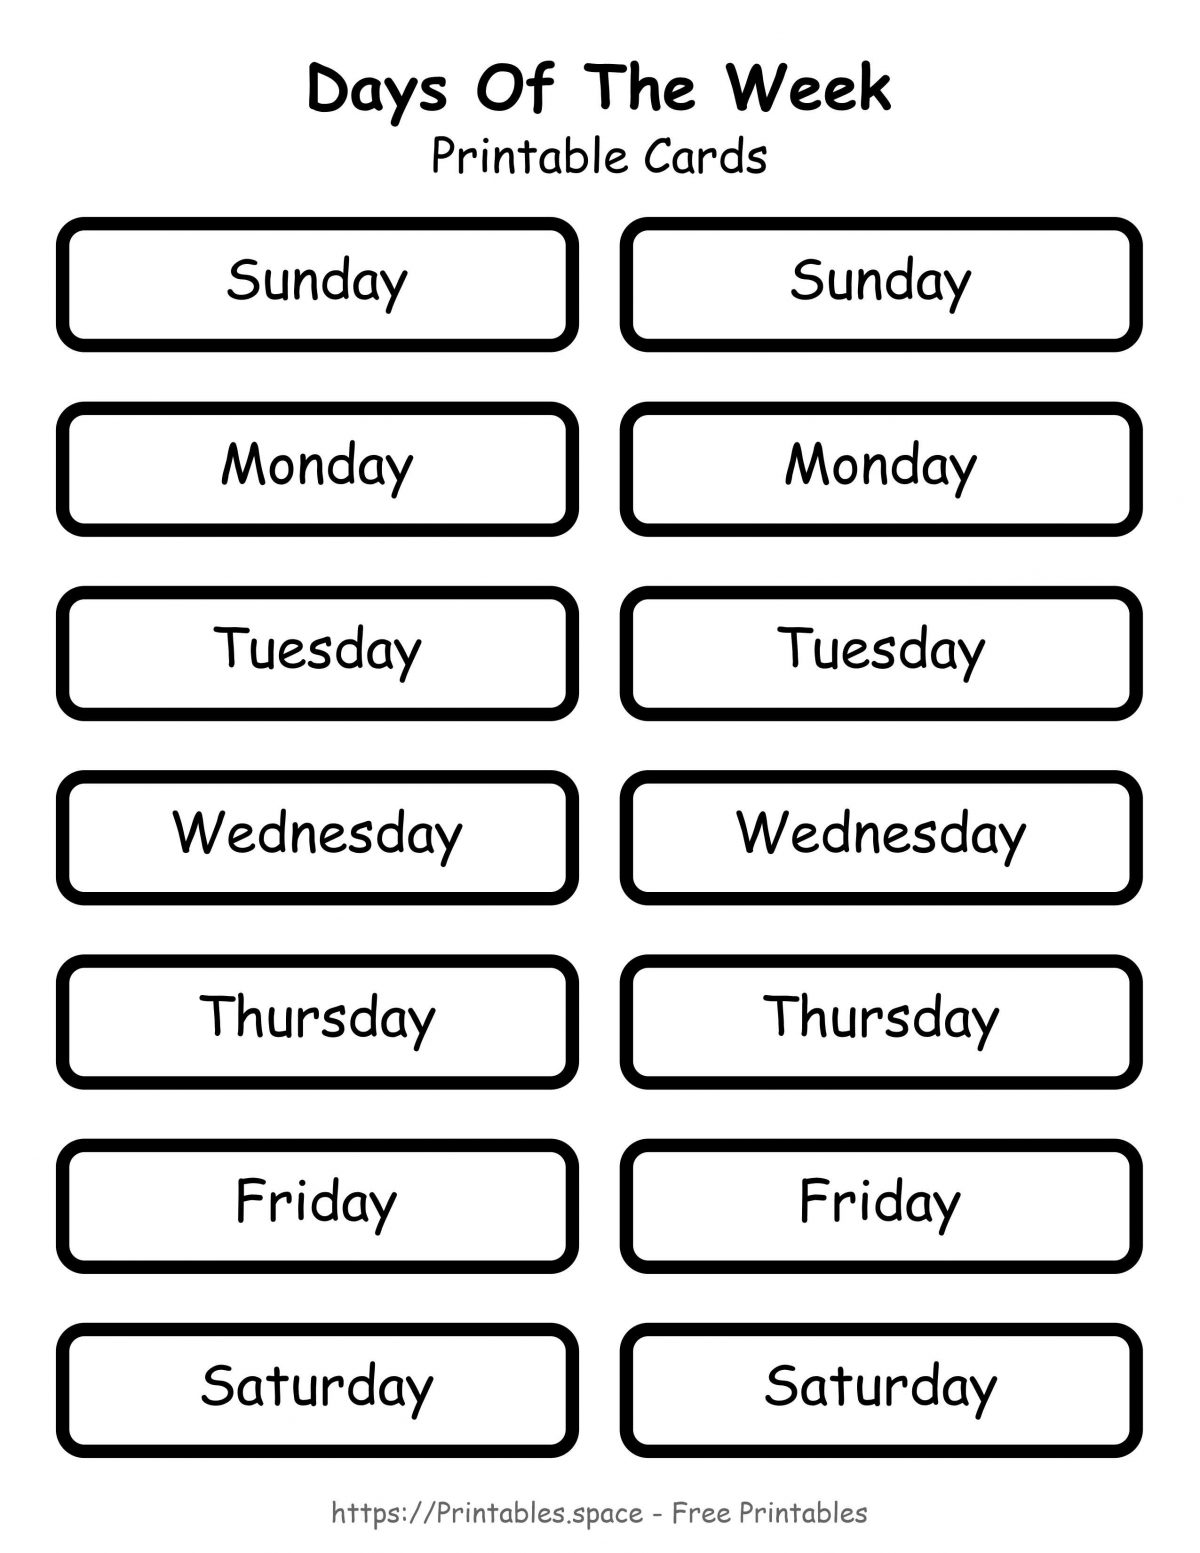 Days Of The Week Cards